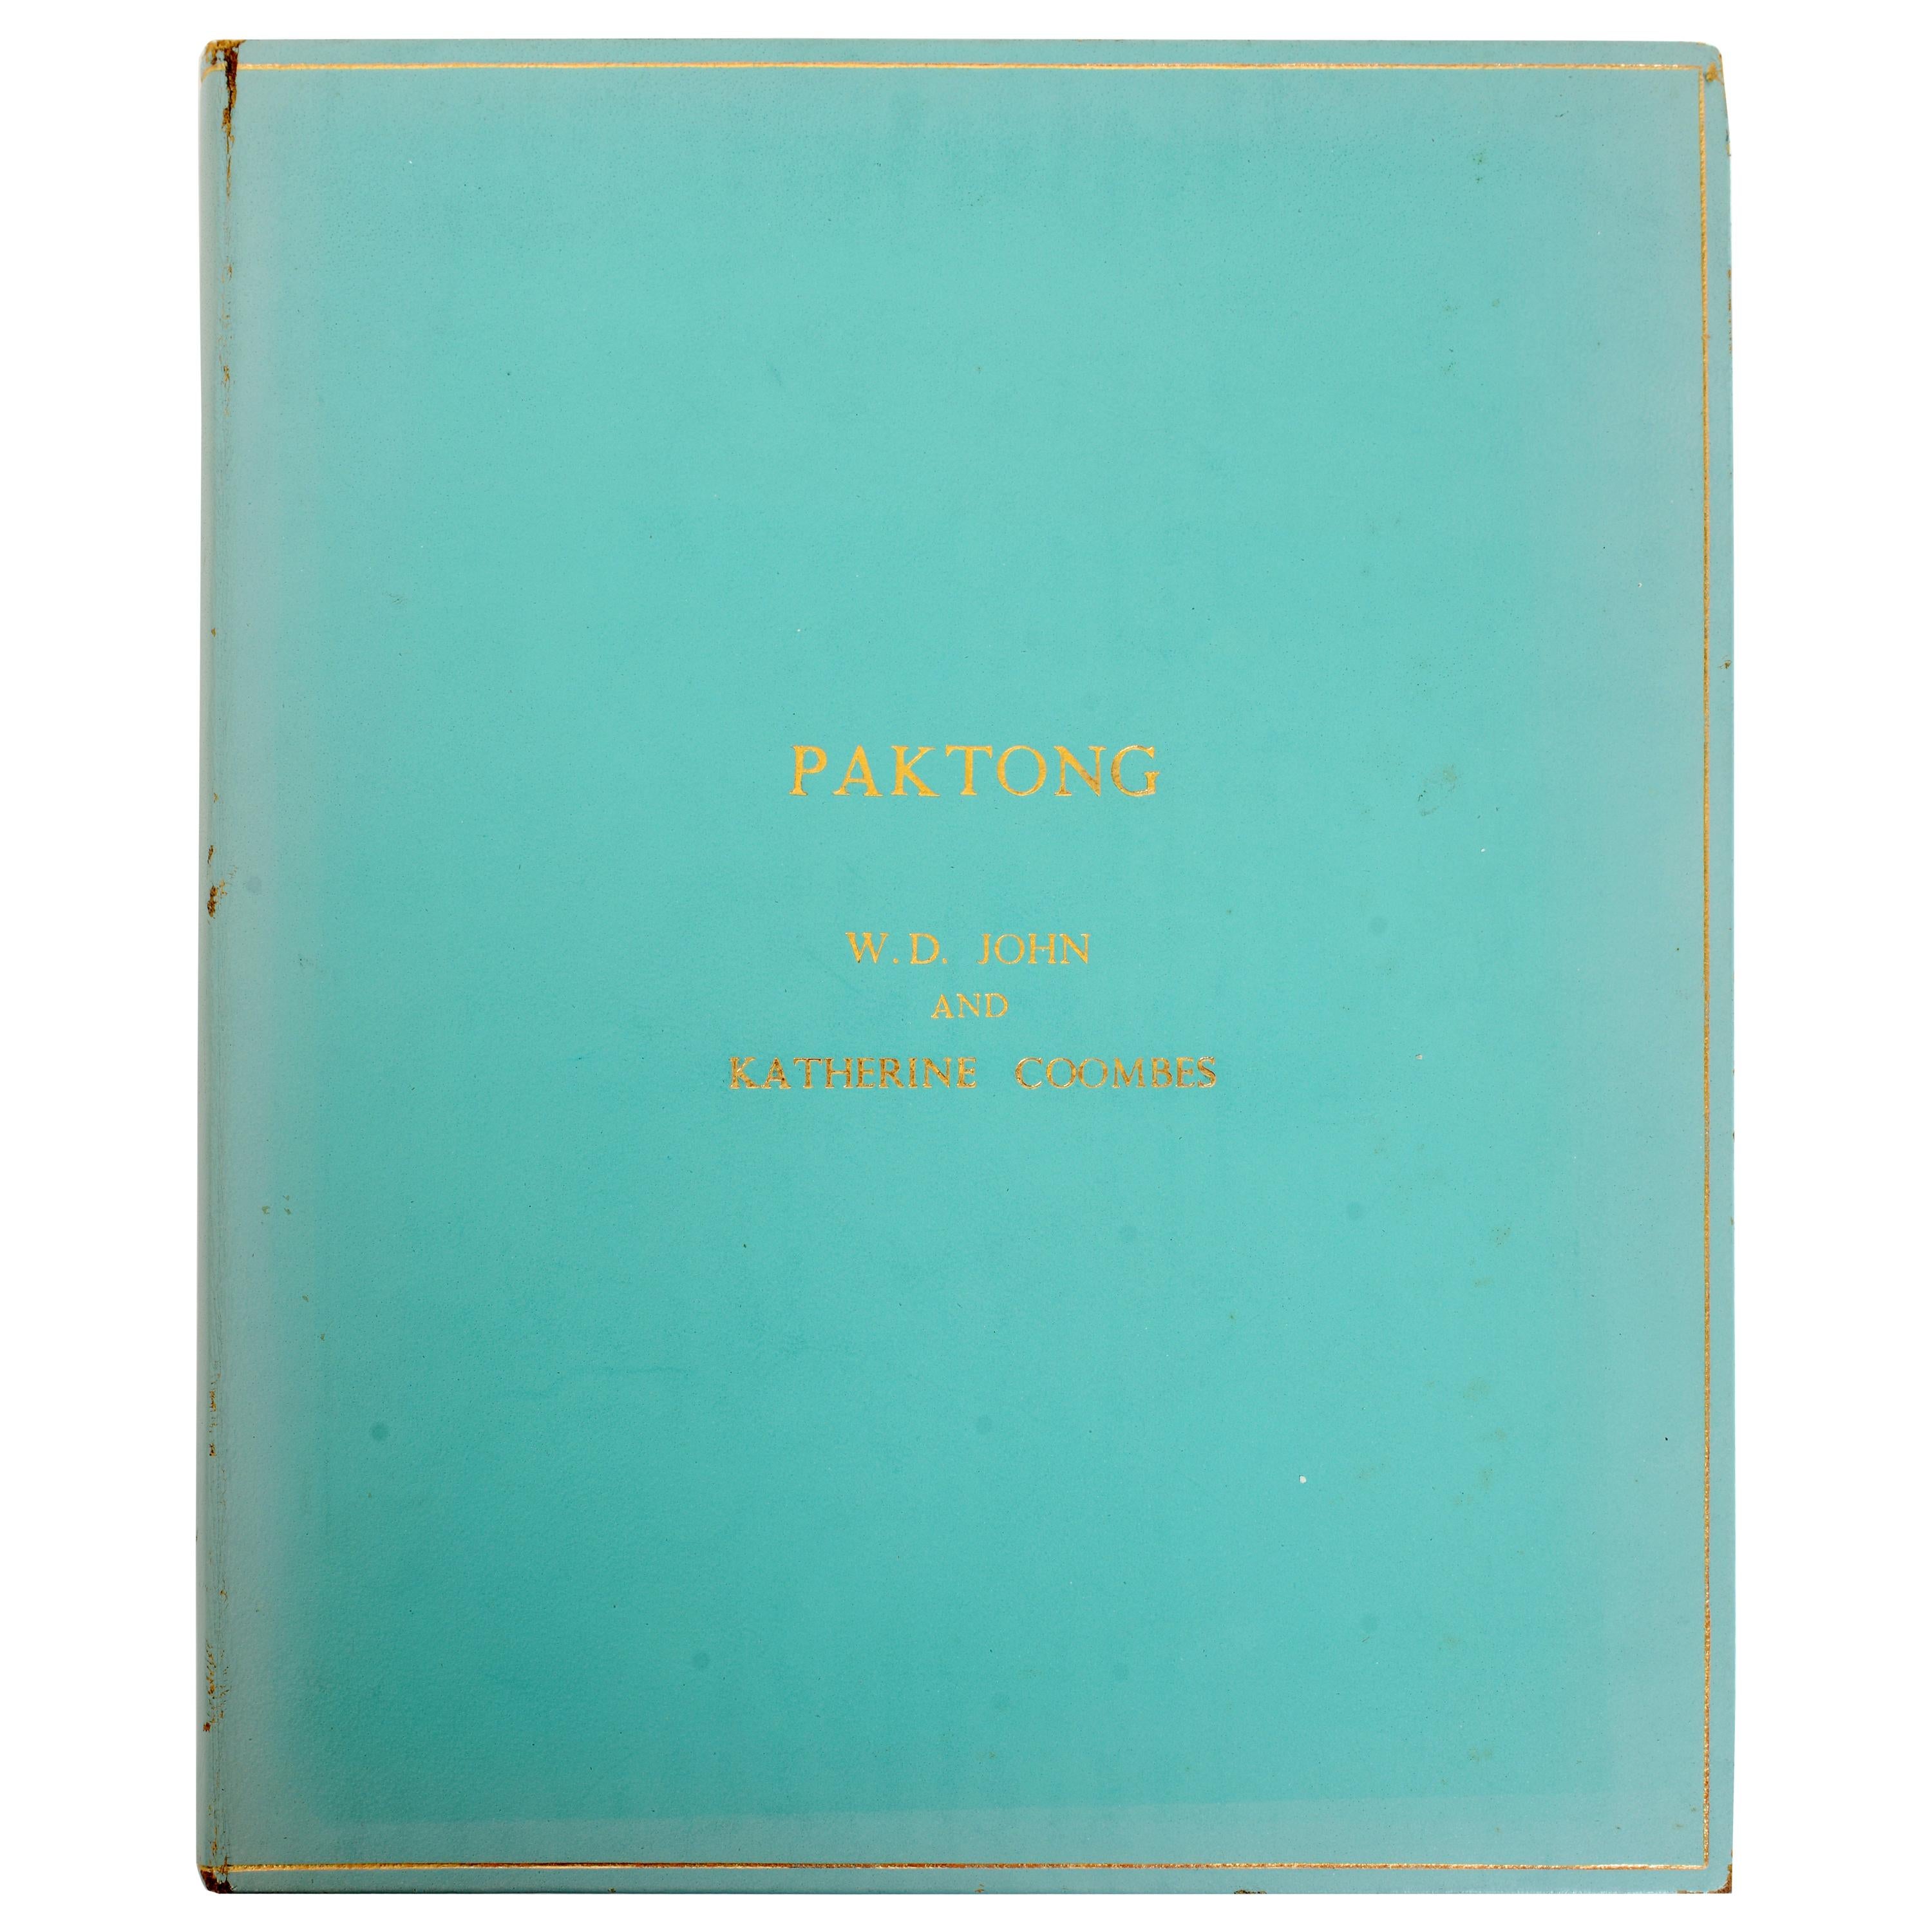 Paktong, by W.D. John & Katherine Coombes, 1/500, Signed by the Authors, 1st Ed